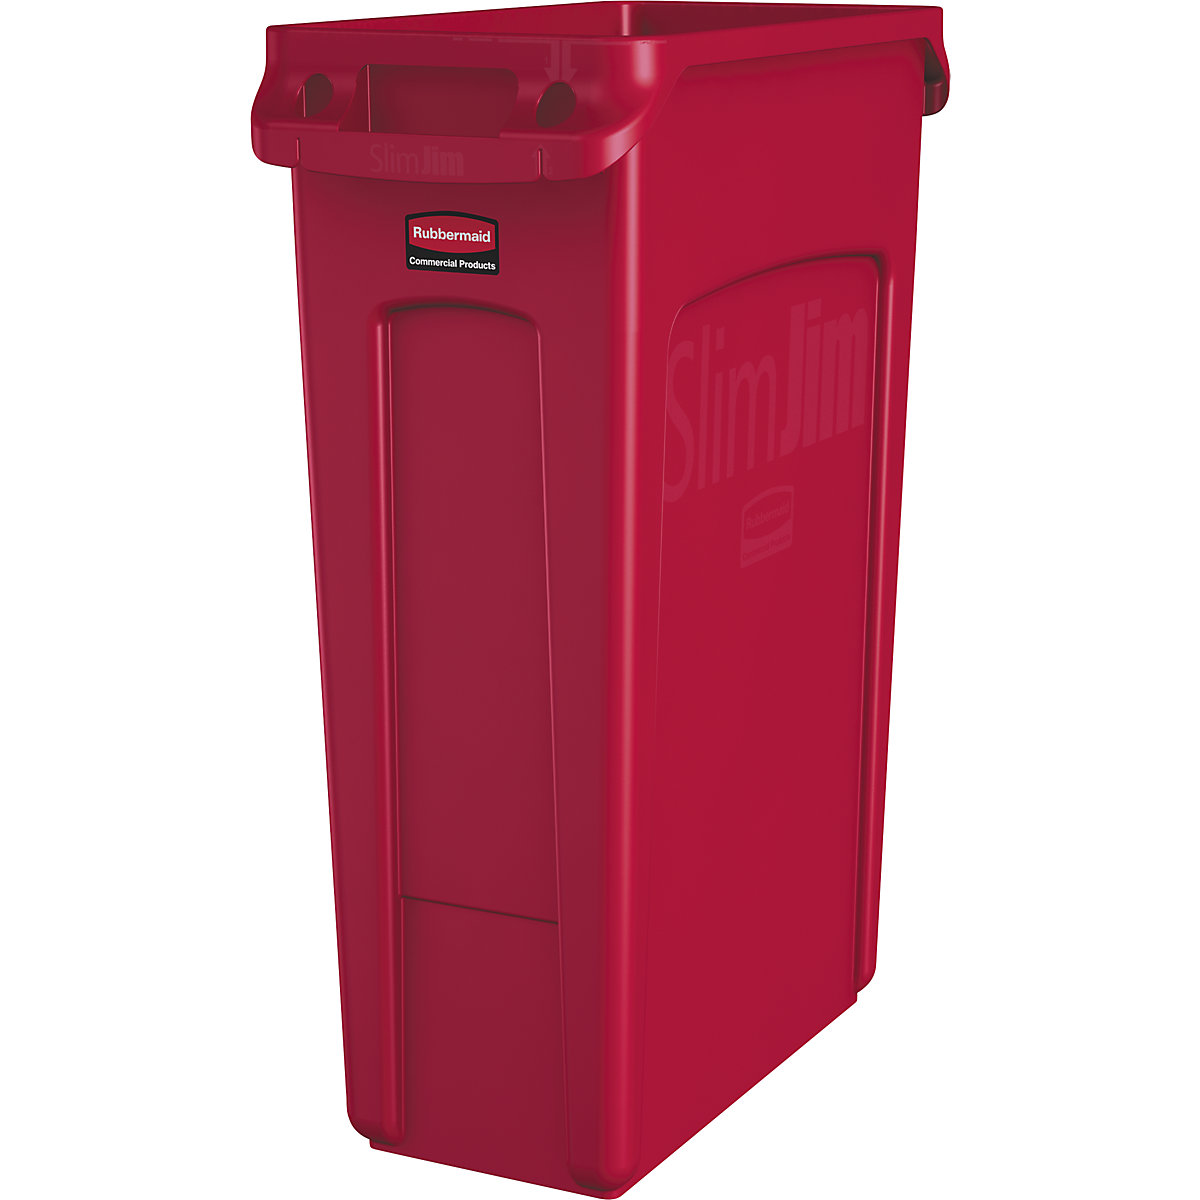 SLIM JIM® recyclable waste collector/waste bin – Rubbermaid, capacity 87 l, with ventilation ducts, red-10